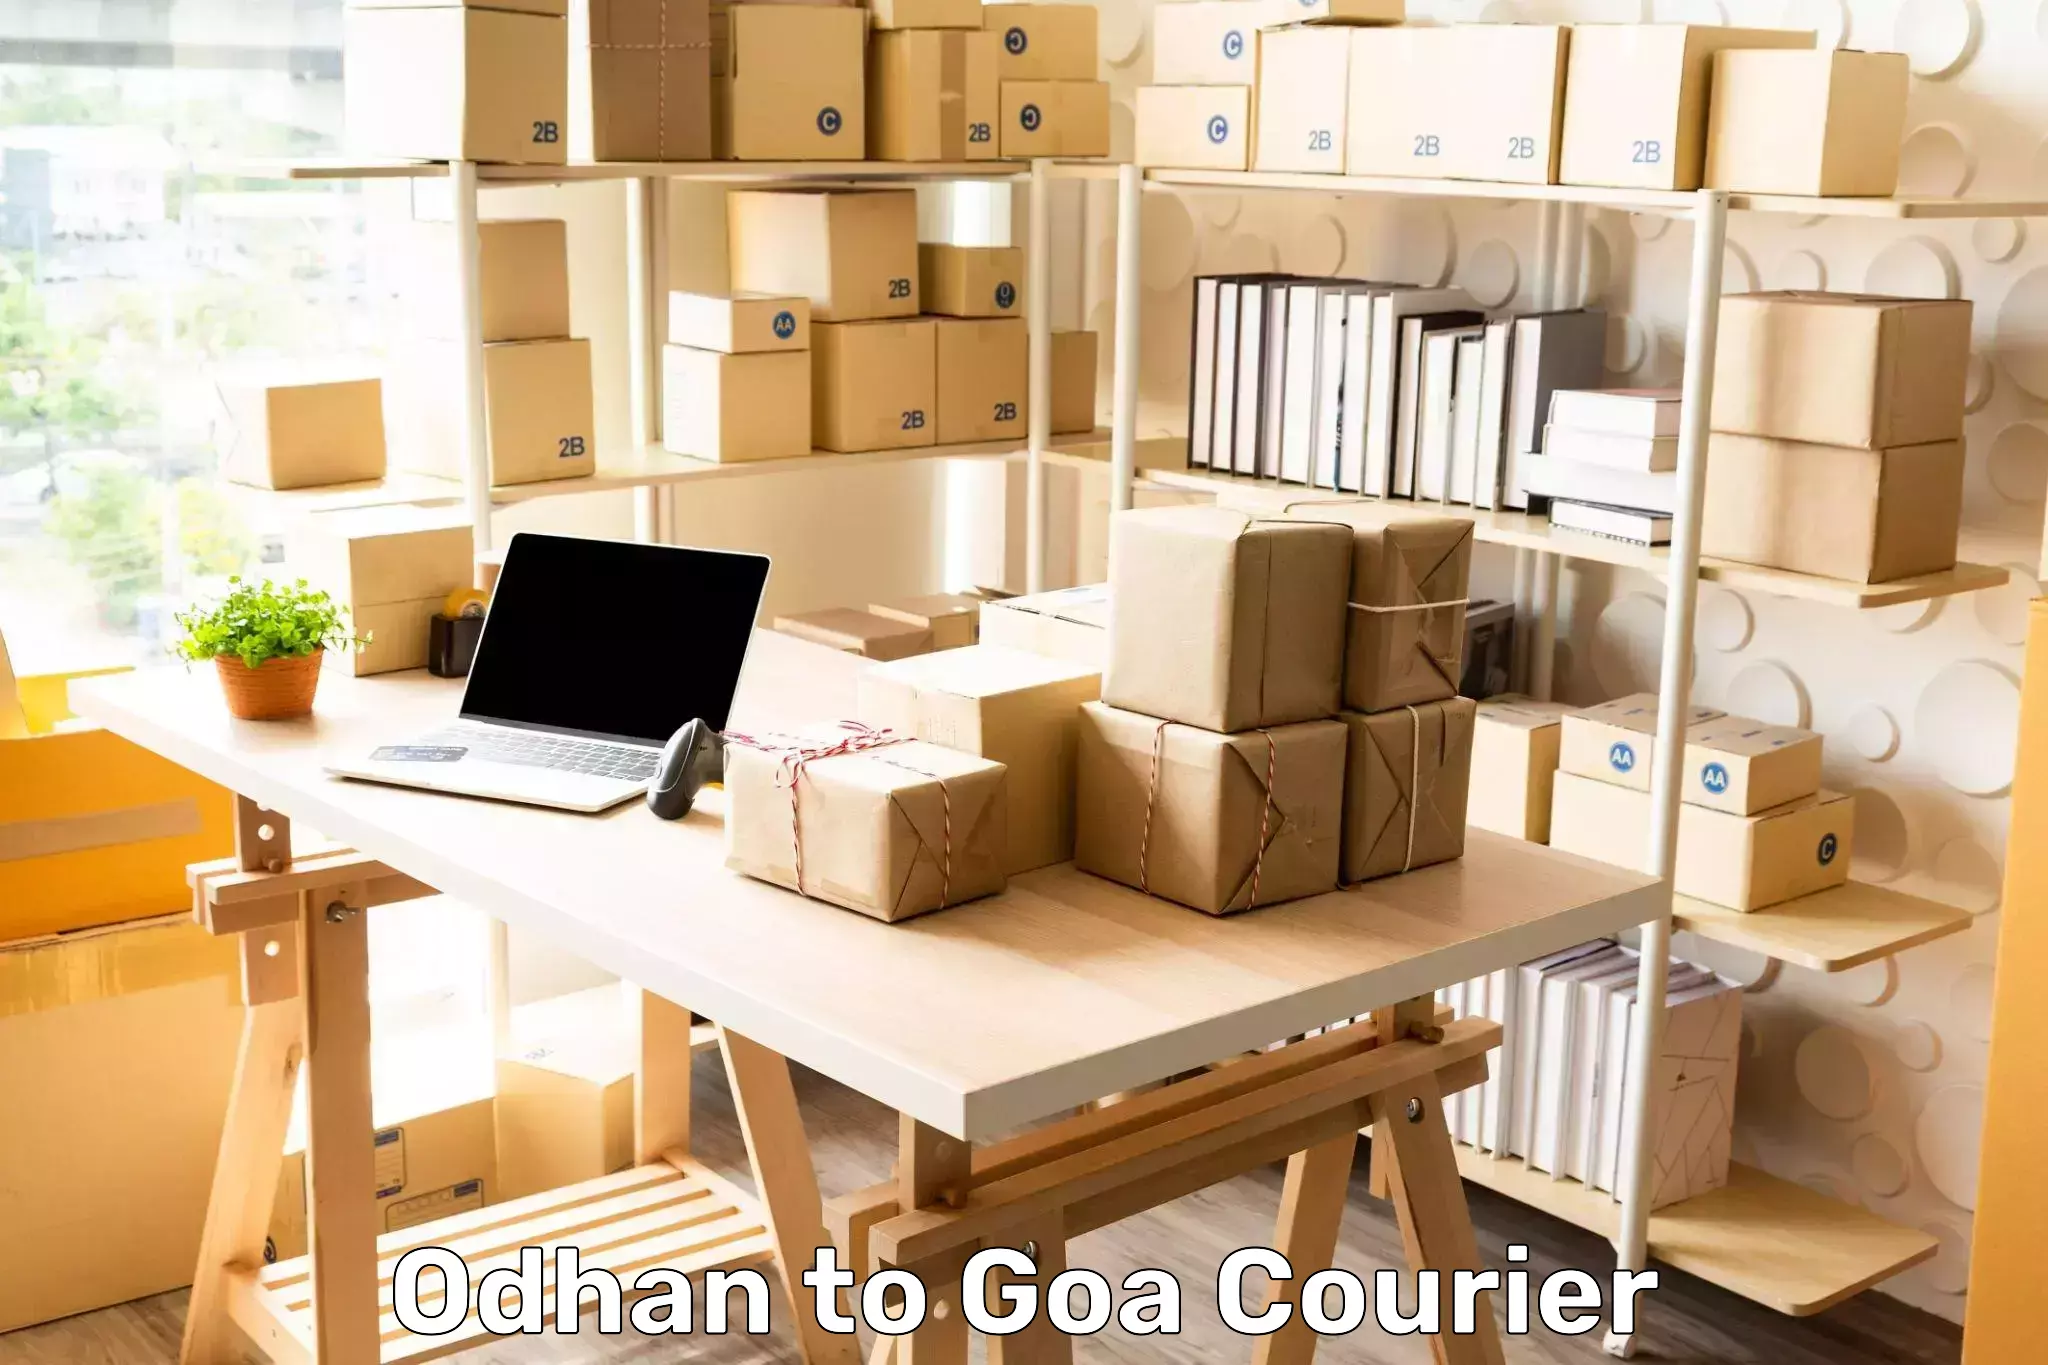 Business logistics support Odhan to Goa